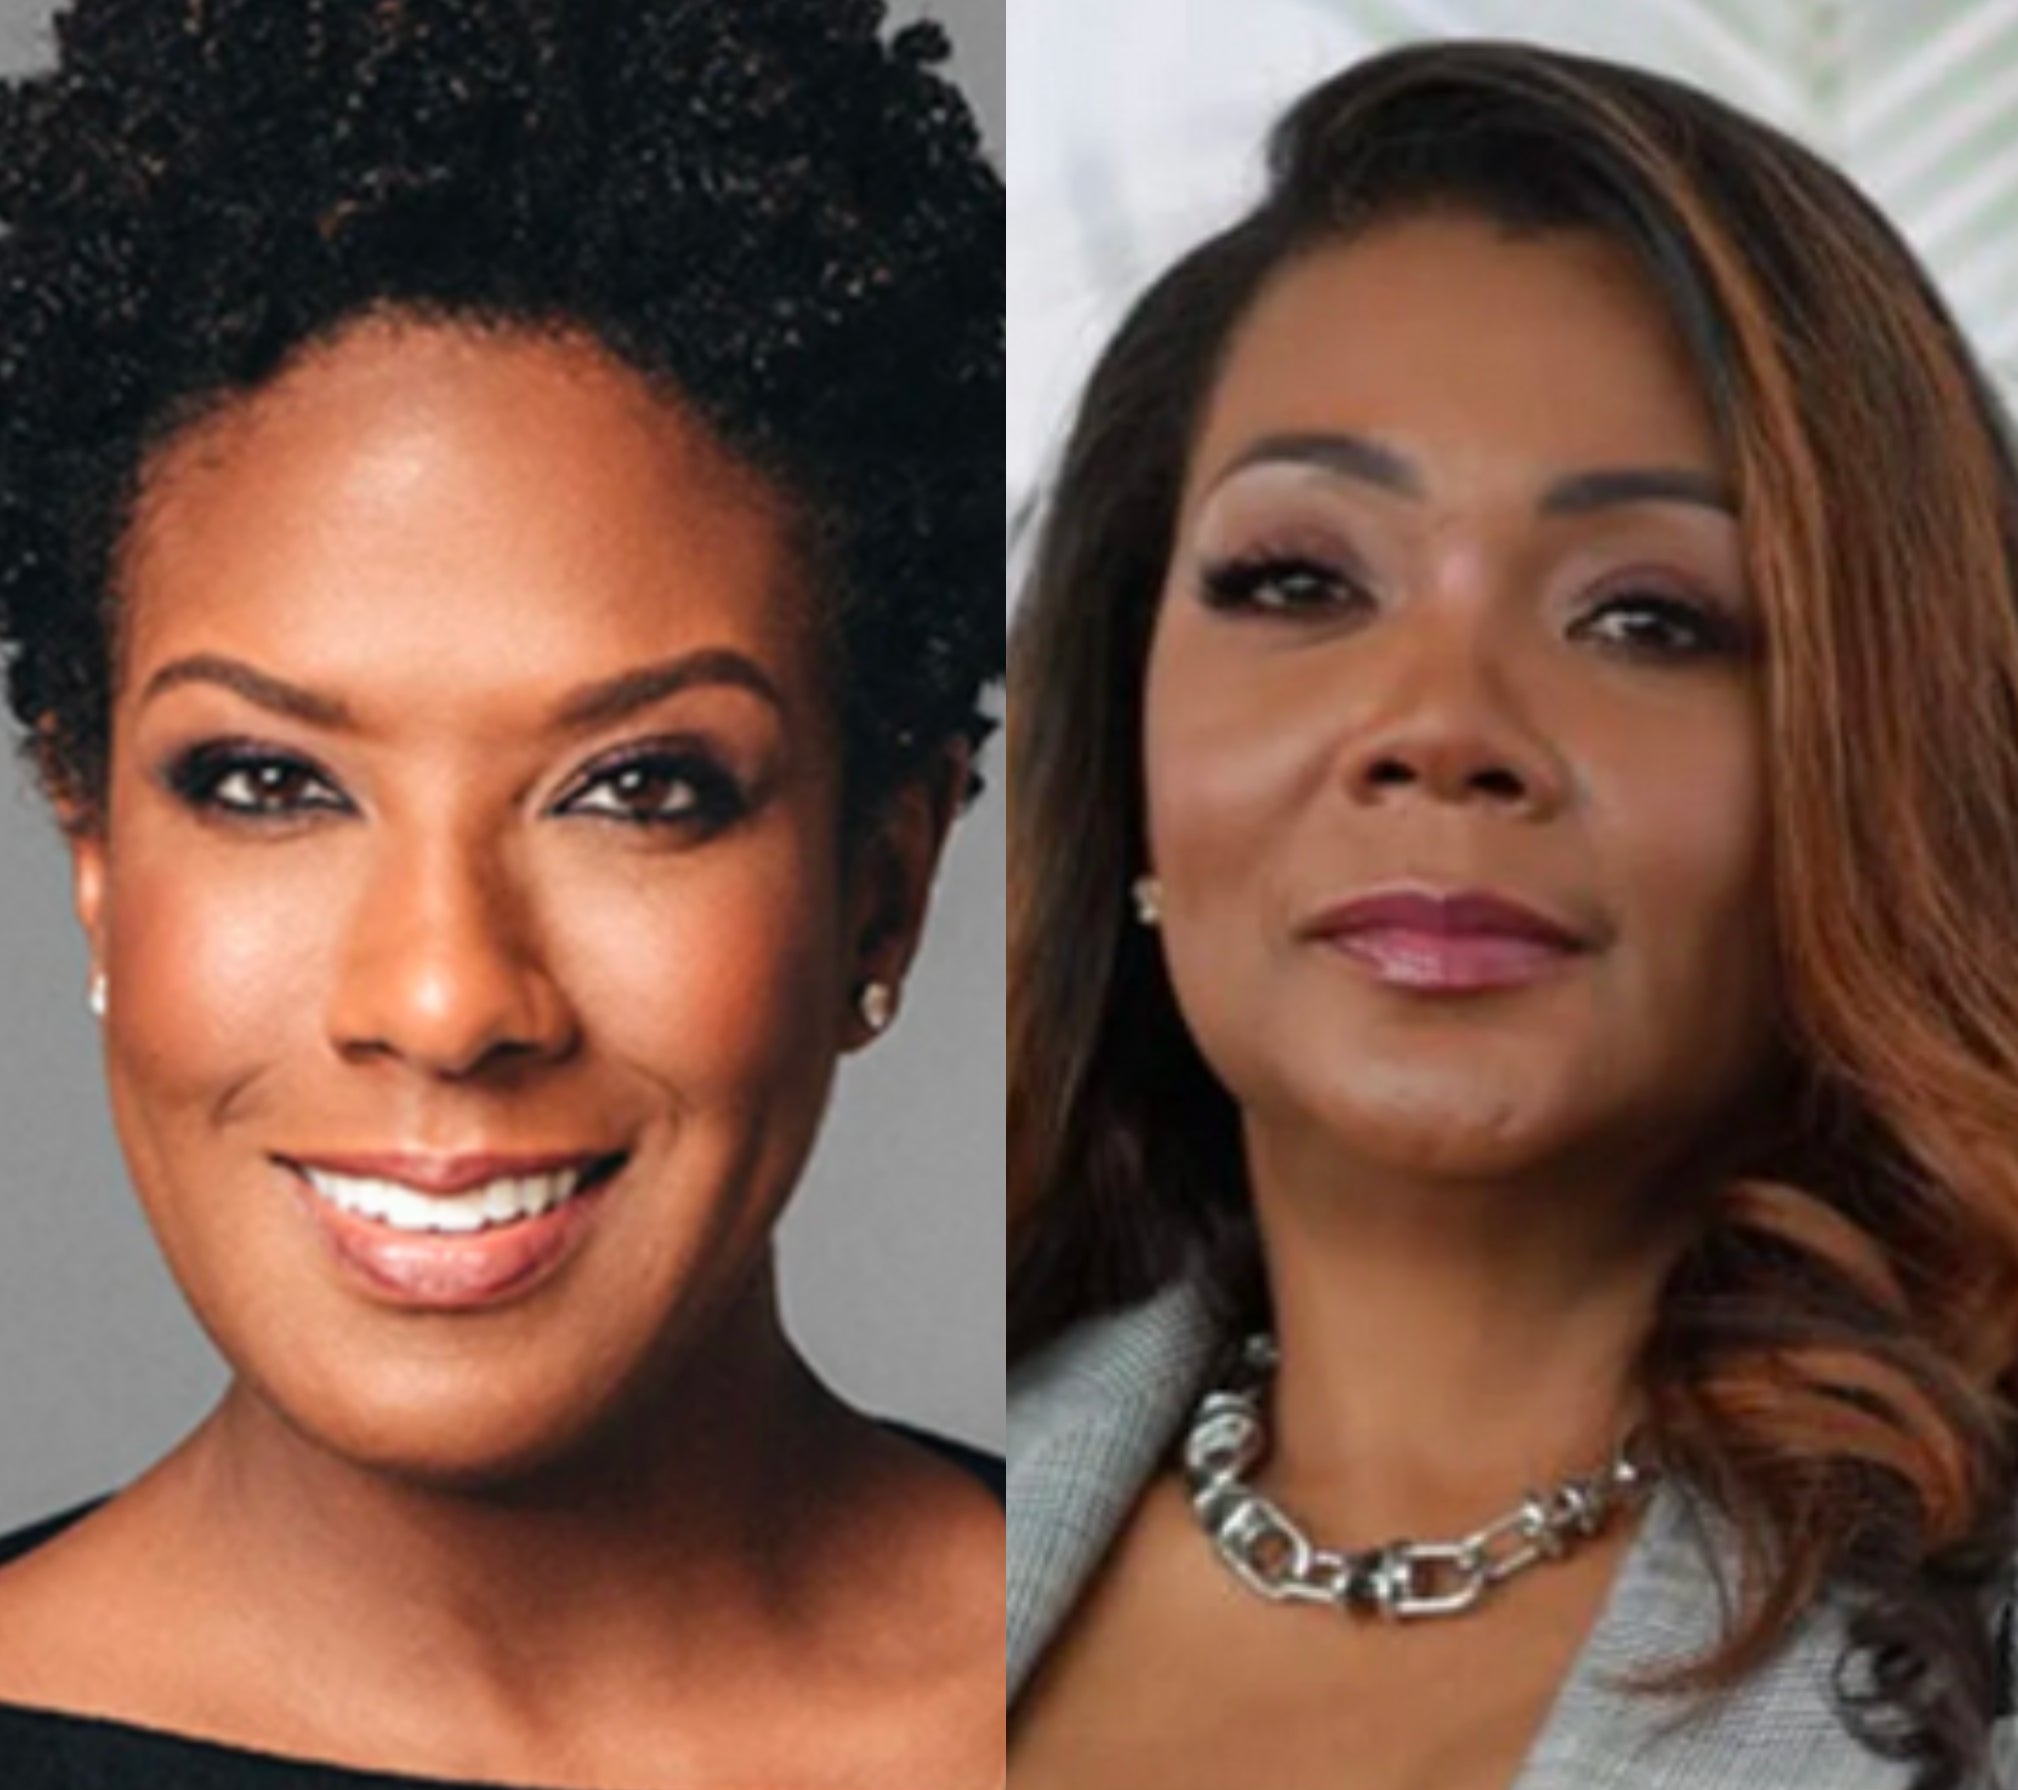 Successful Black Women From Across The Diaspora Share Their Journeys To The C-Suite